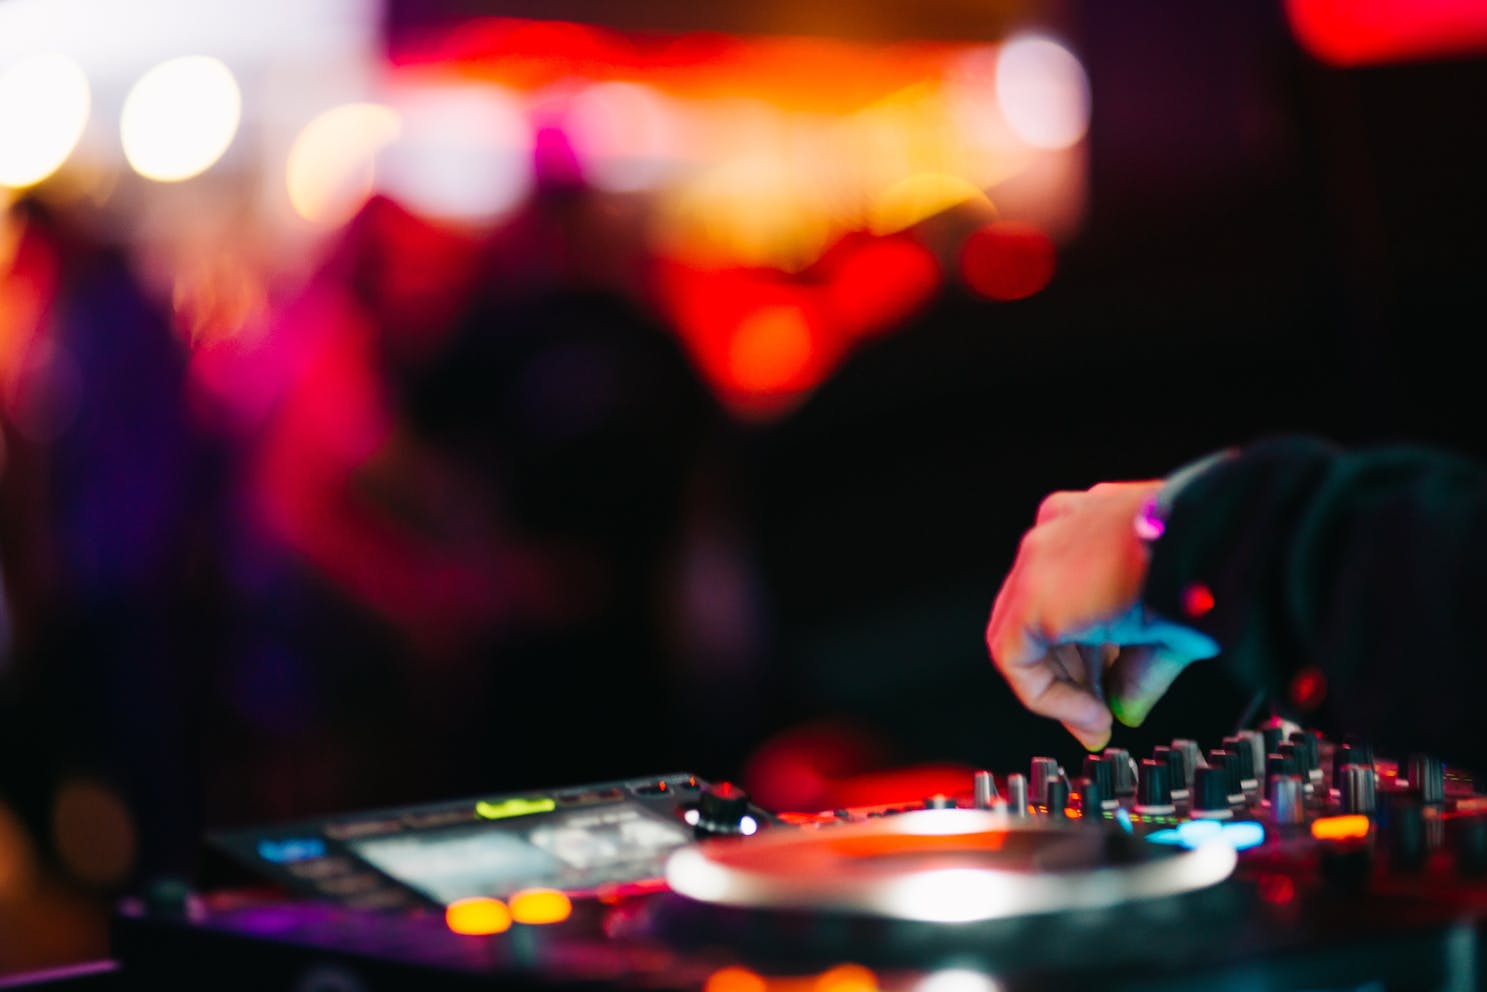 Matching the beat of two tracks is a skill you need to play a seamless DJ mix